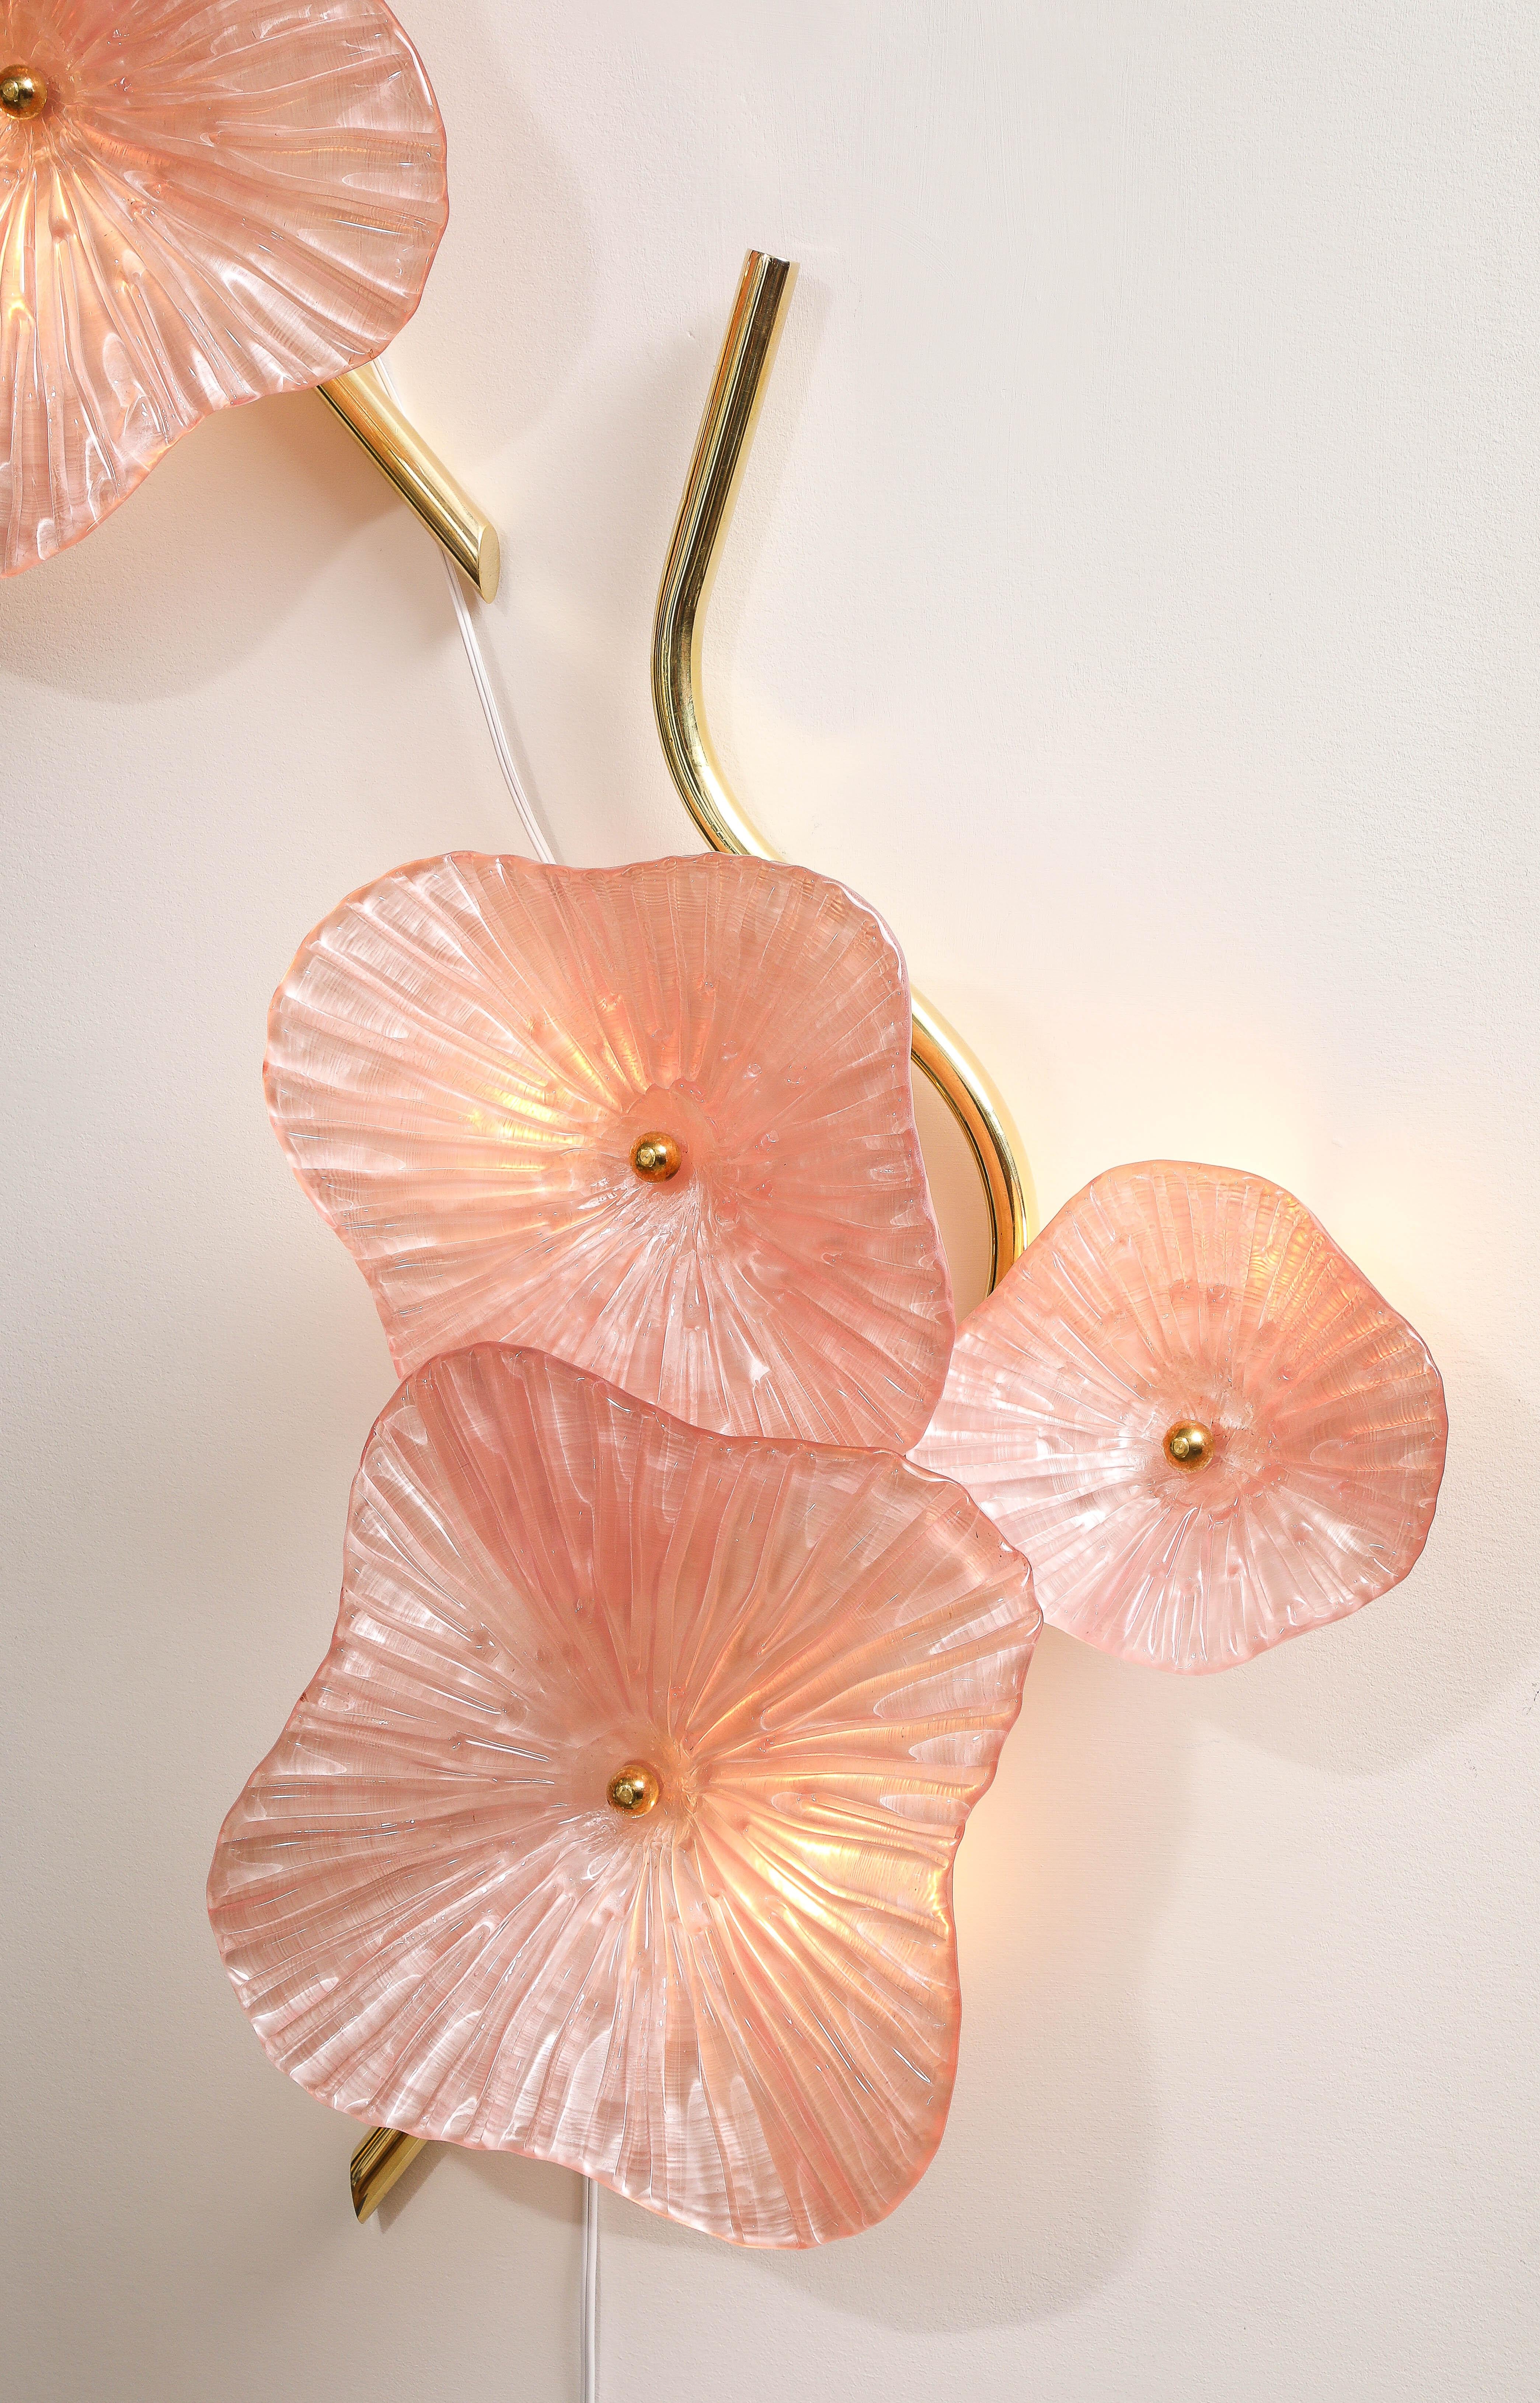 Pair of Blush Pink Murano Glass flower sconce or wall art with brass frame. Hand-casted and formed Murano glass flowers in a pink blush color are attached with a brass caps to brass stems. The Murano glass flowers vary in size to give this wall art